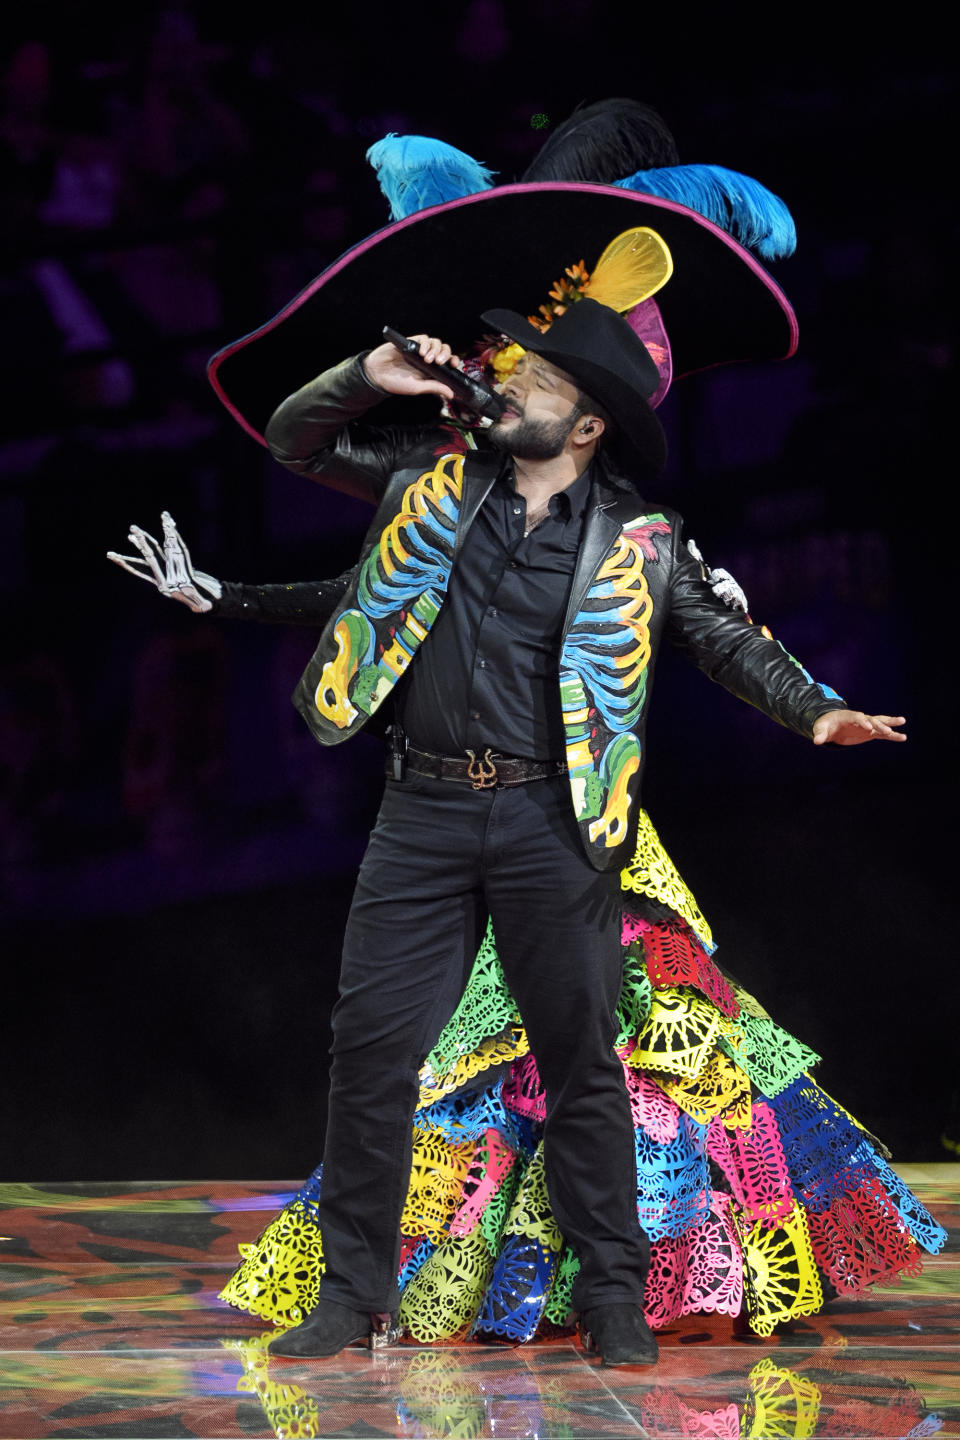 Mexican singer Leandro Aguilar, the son of Grammy-winning singer songwriter Pepe Aguilar, performs at the "Jaripeo Hasta Los Huesos Tour 2024" show at the Honda Center in Anaheim, Calif., on Friday, March 29, 2024. The show pays tribute to the Day of the Dead, a well-known Mexican celebration. (AP Photo/Damian Dovarganes)